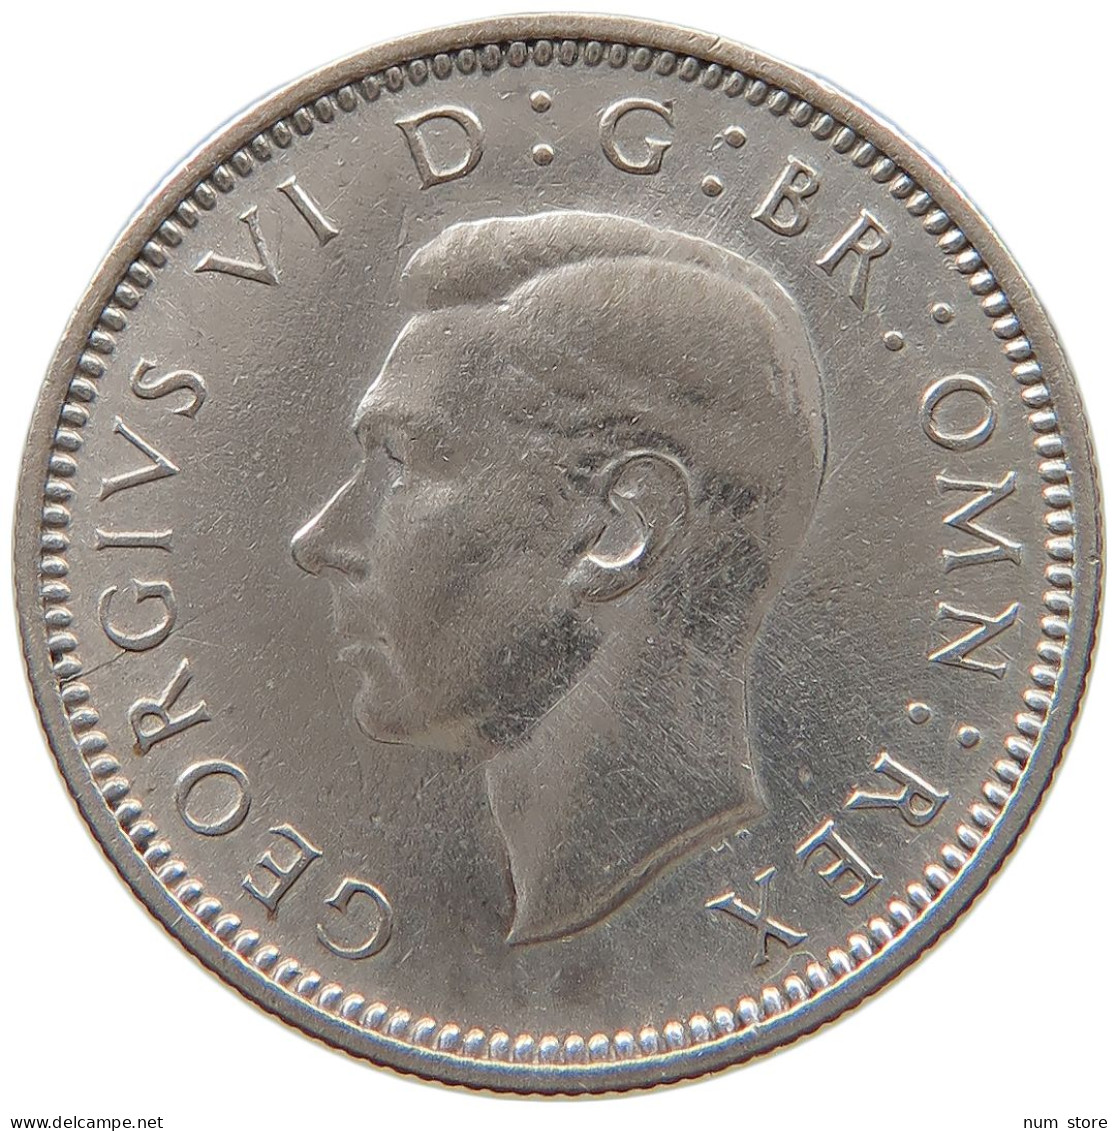 GREAT BRITAIN SIXPENCE 1944 George VI. (1936-1952) #t162 0211 - H. 6 Pence